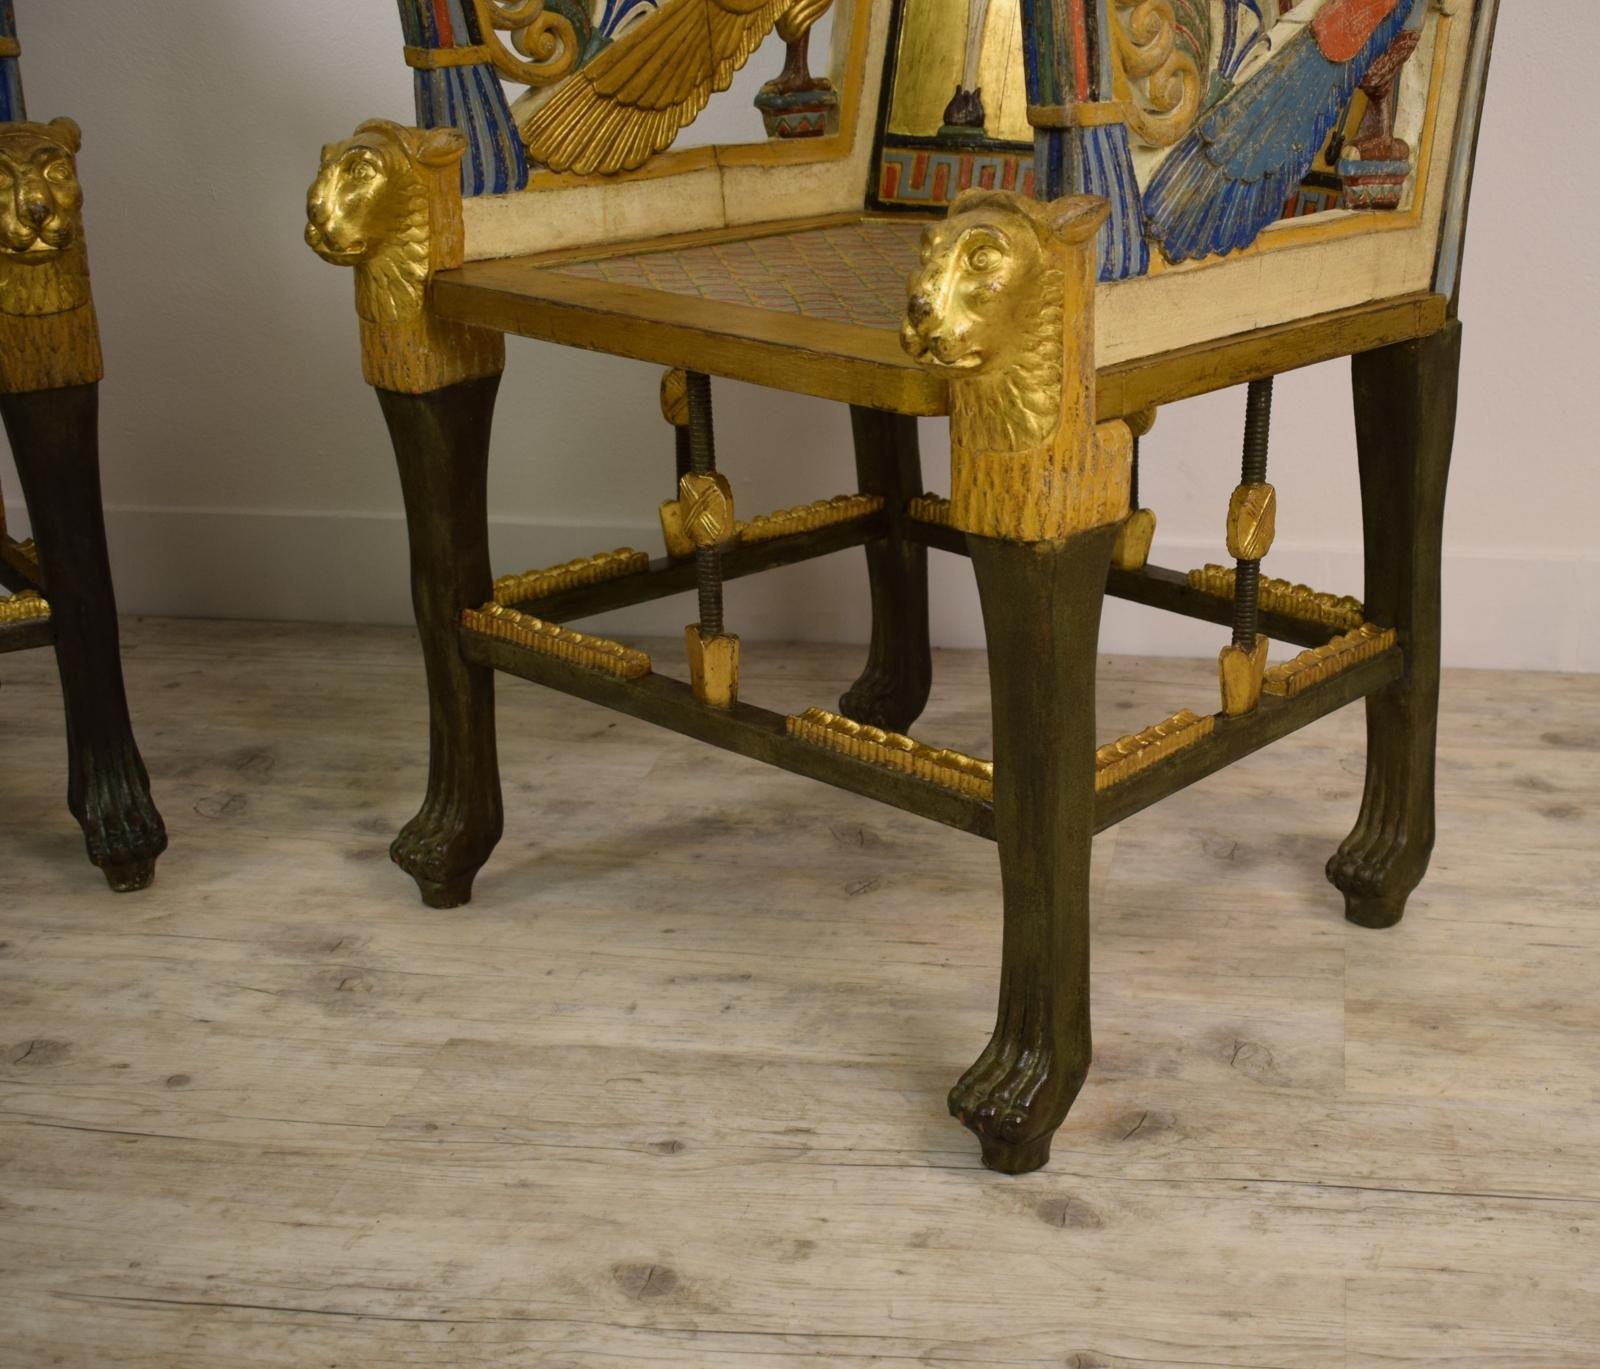 20th Century, Pair of Lacquered Giltwood Armchairs in Egyptian Revival Style For Sale 2